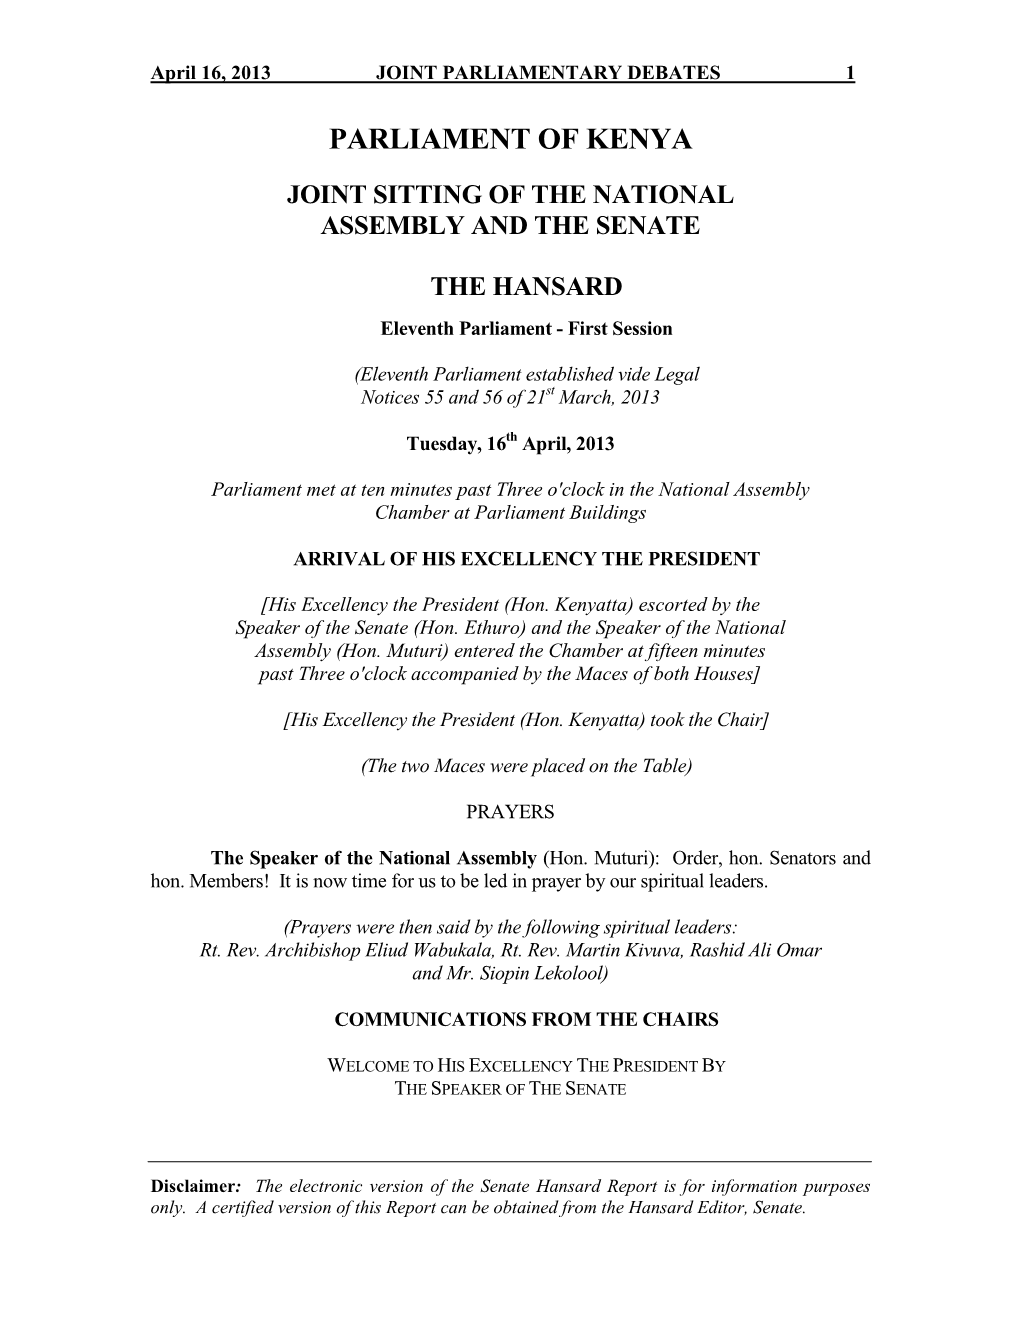 Joint Sitting of the National Assembly and the Senate the Hansard